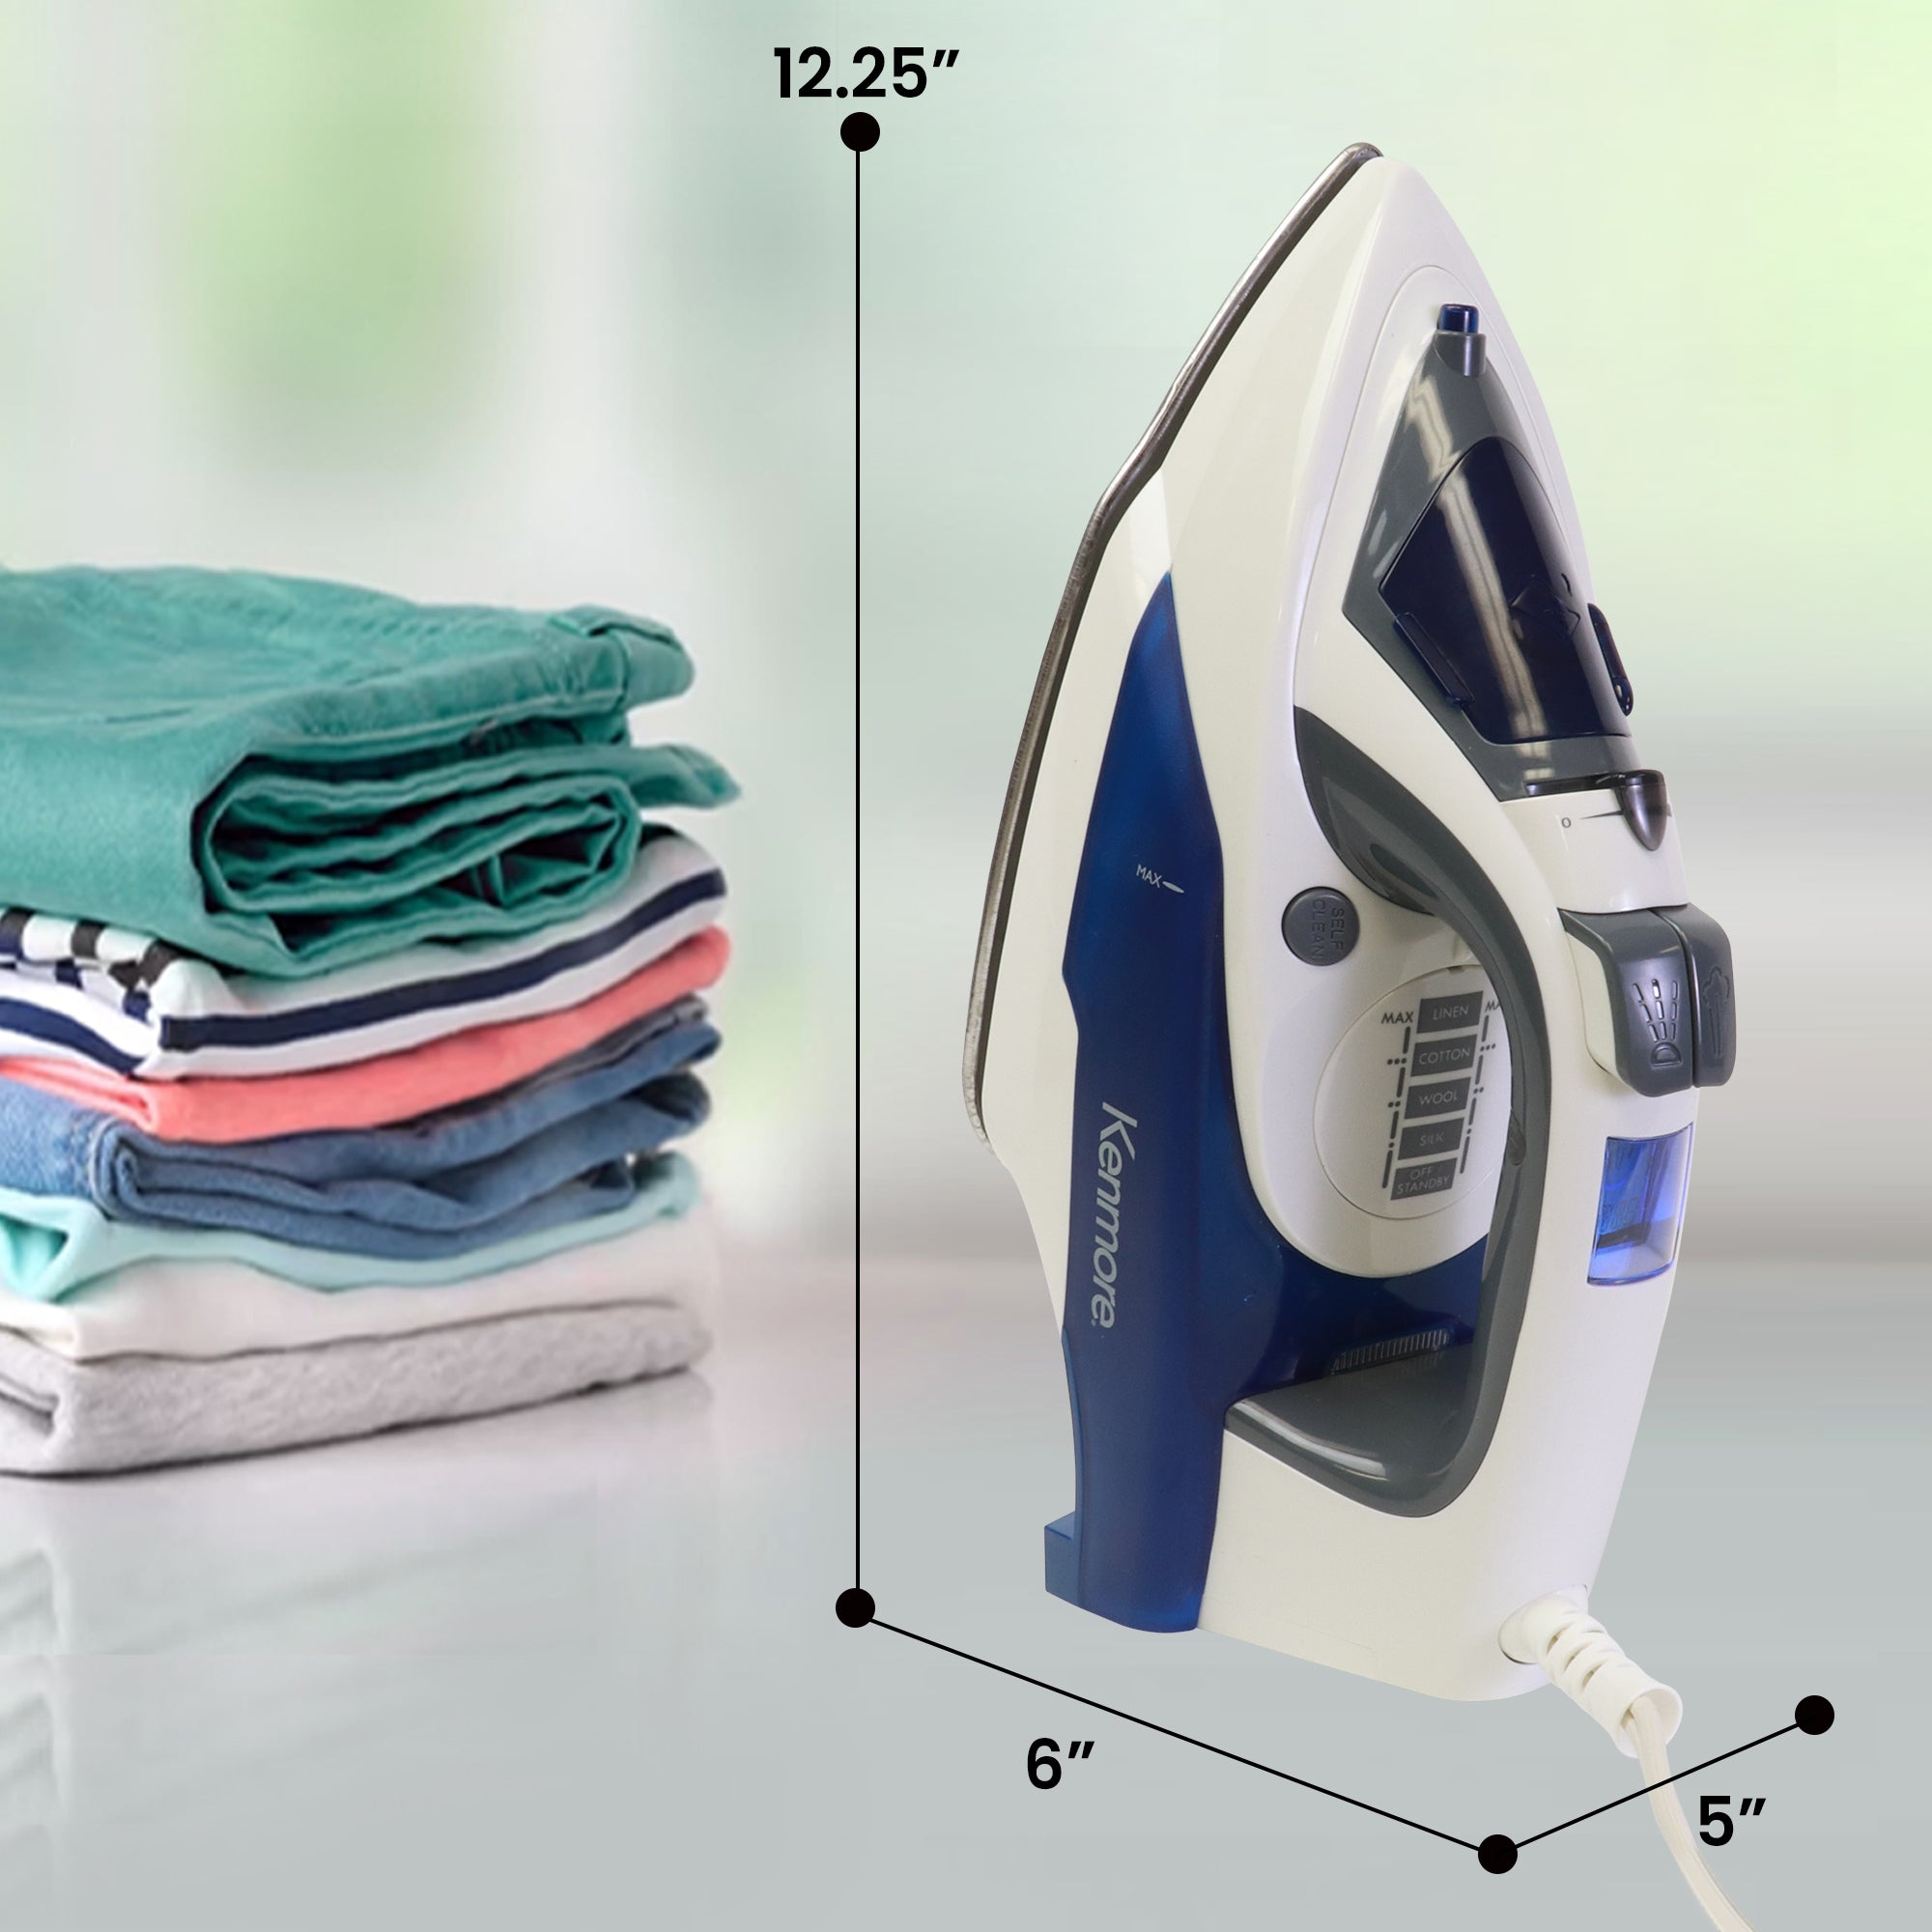 Kenmore digital power steam iron with dimensions labeled beside a pile of neatly folded clothing